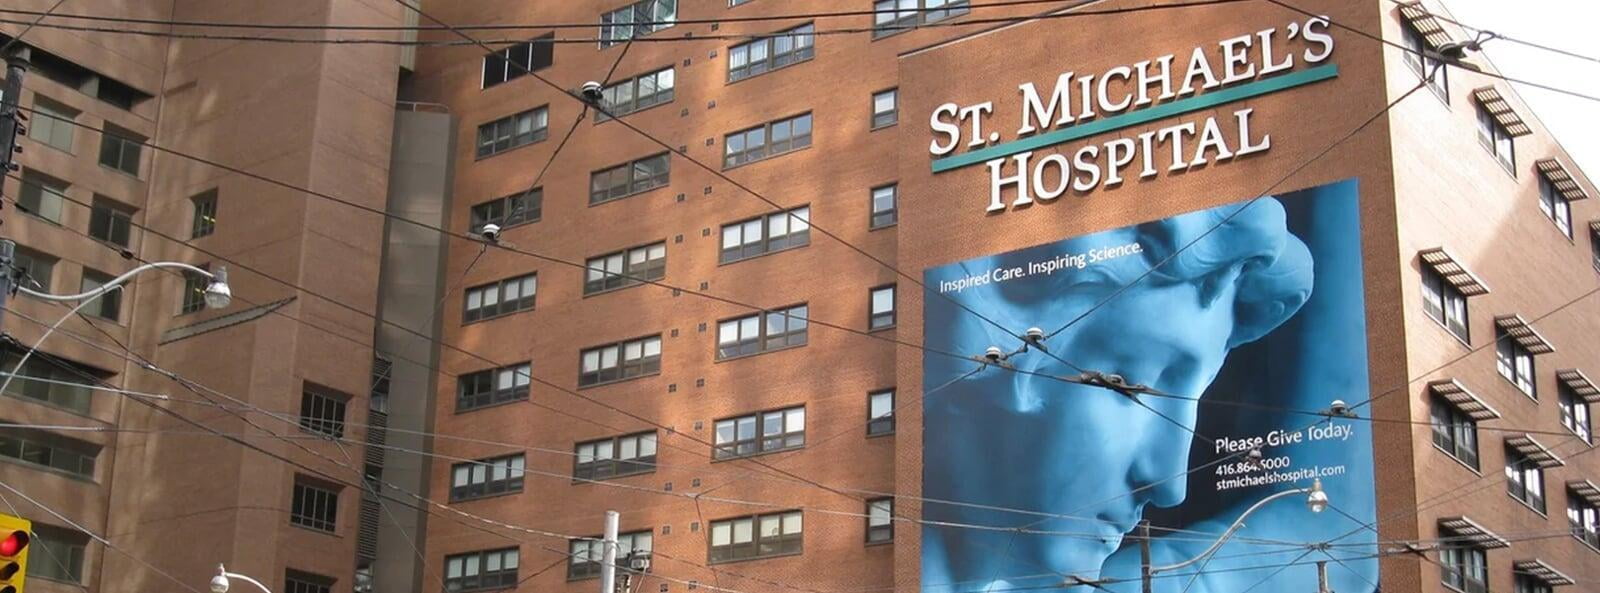 HYPEMedical Becomes St. Michael’s Hospital New OHIP Billing System